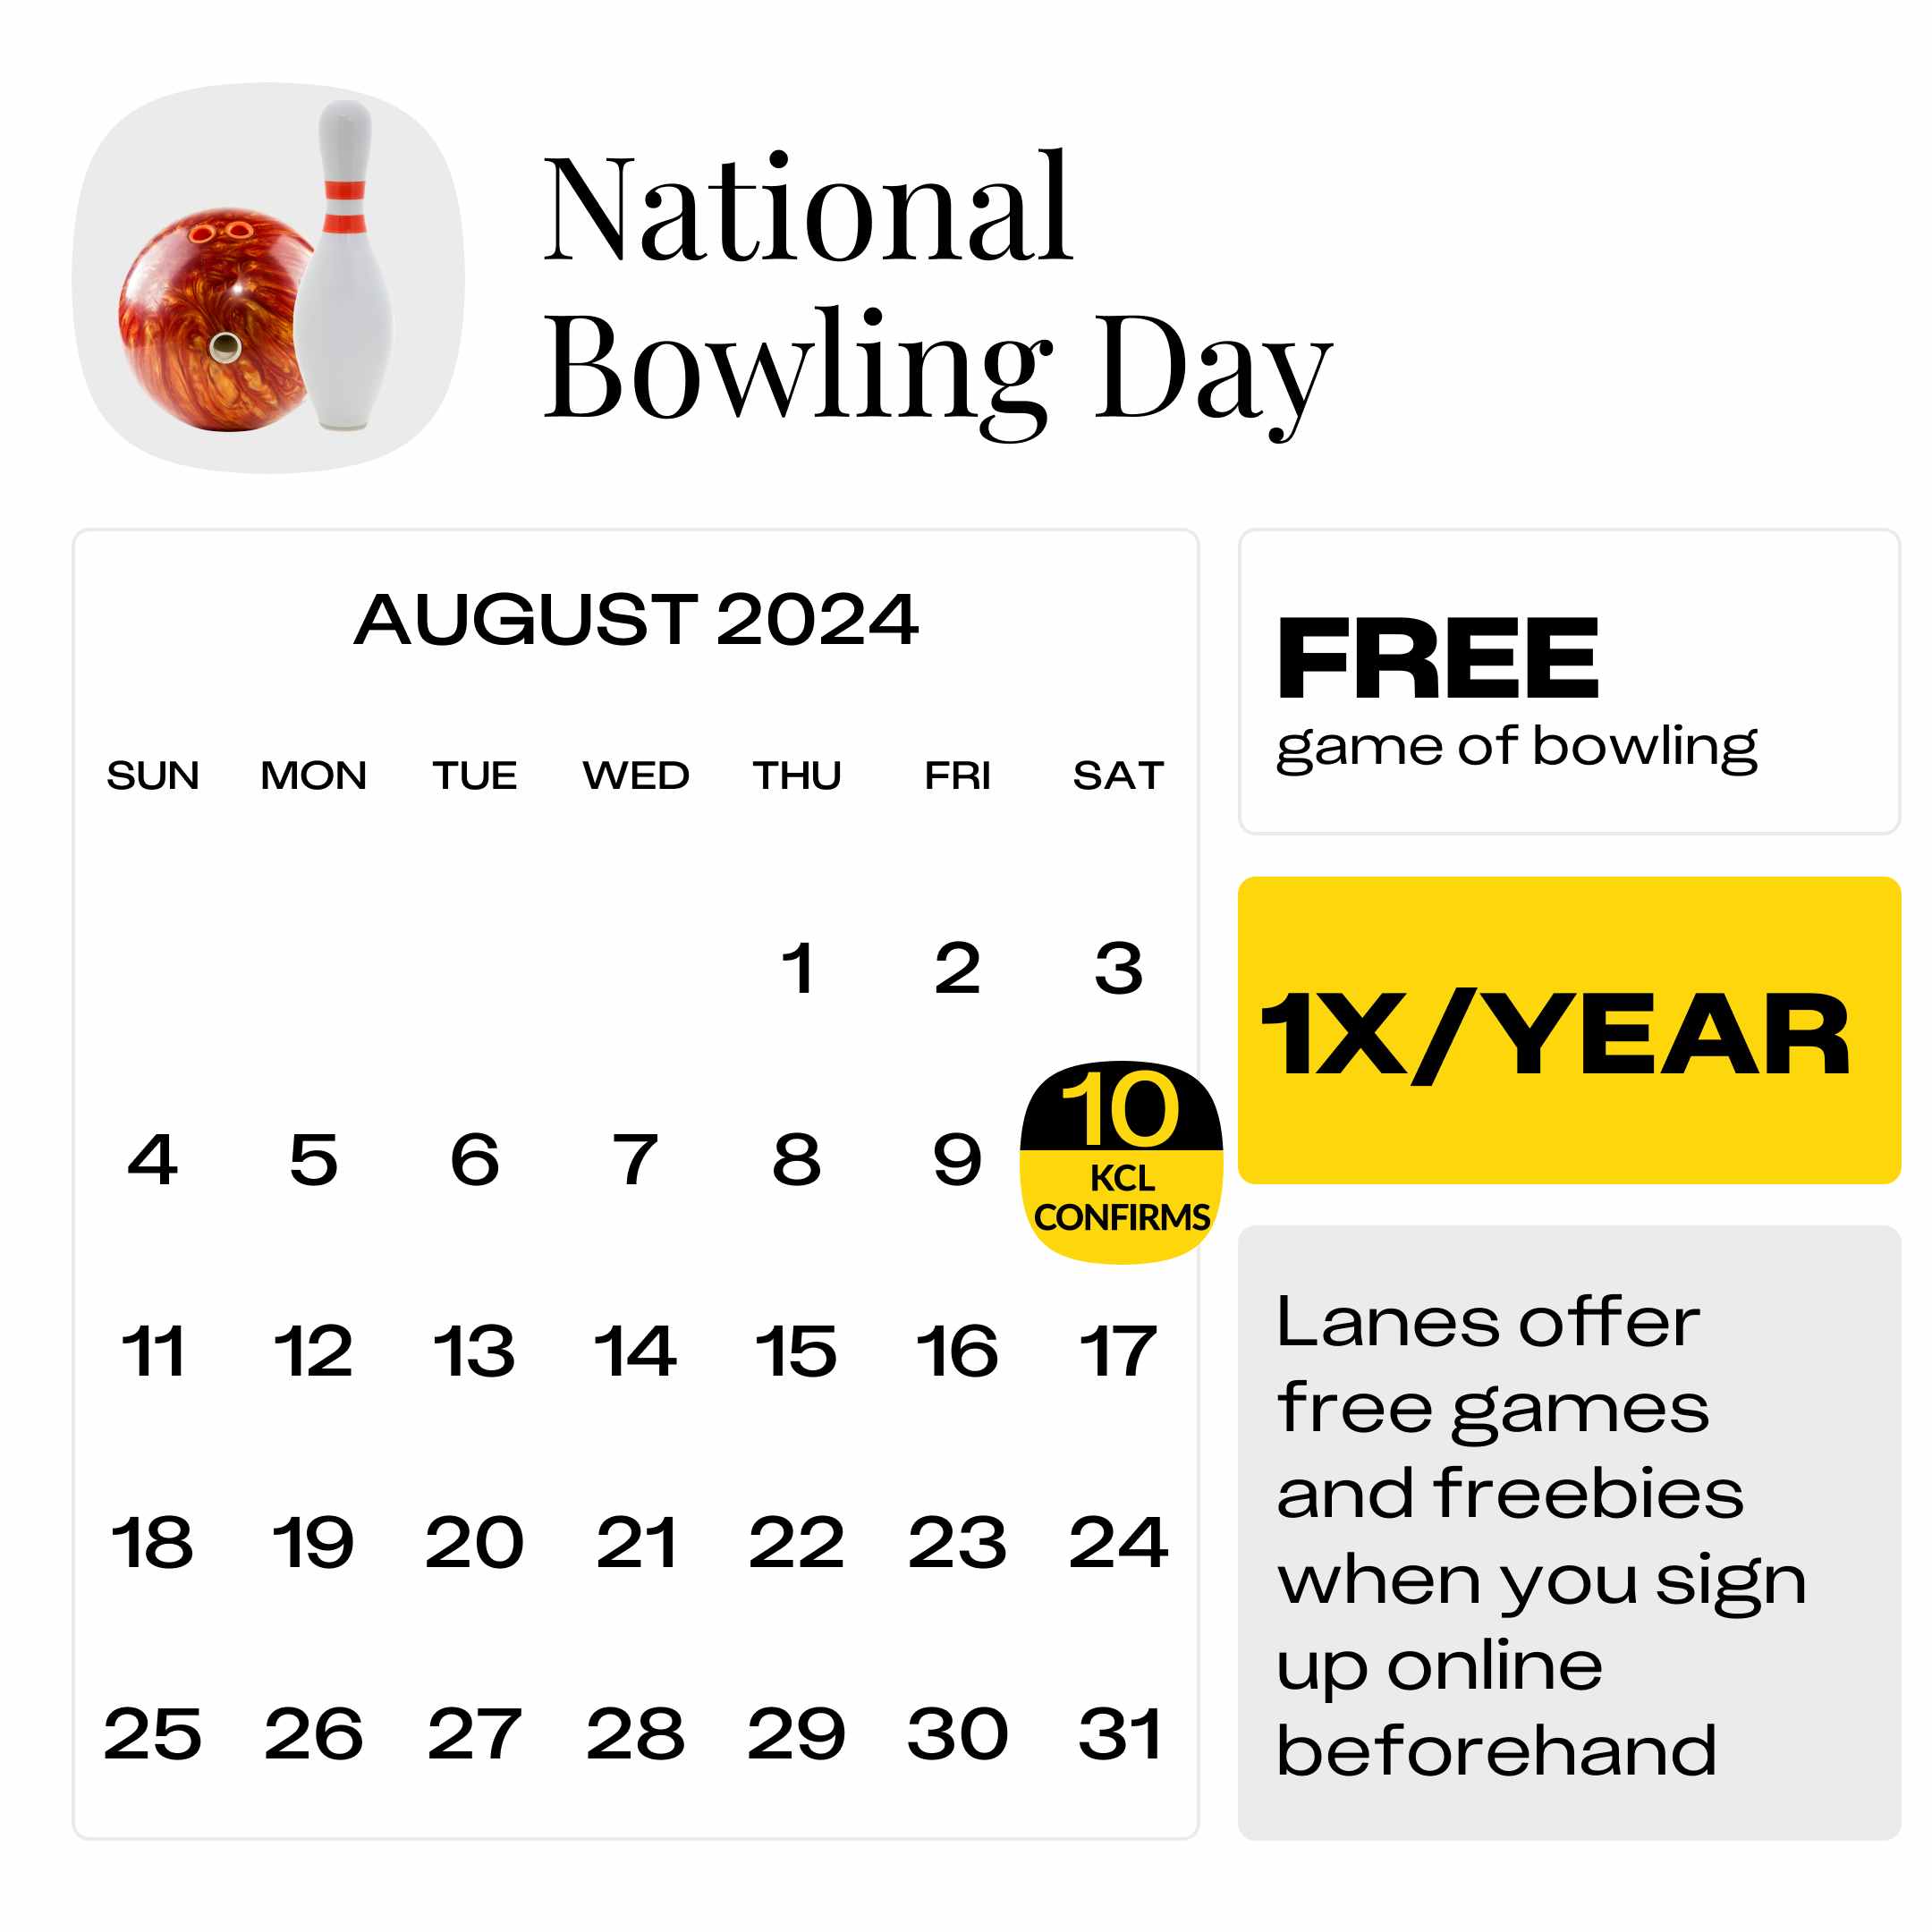 National-Bowling-Day